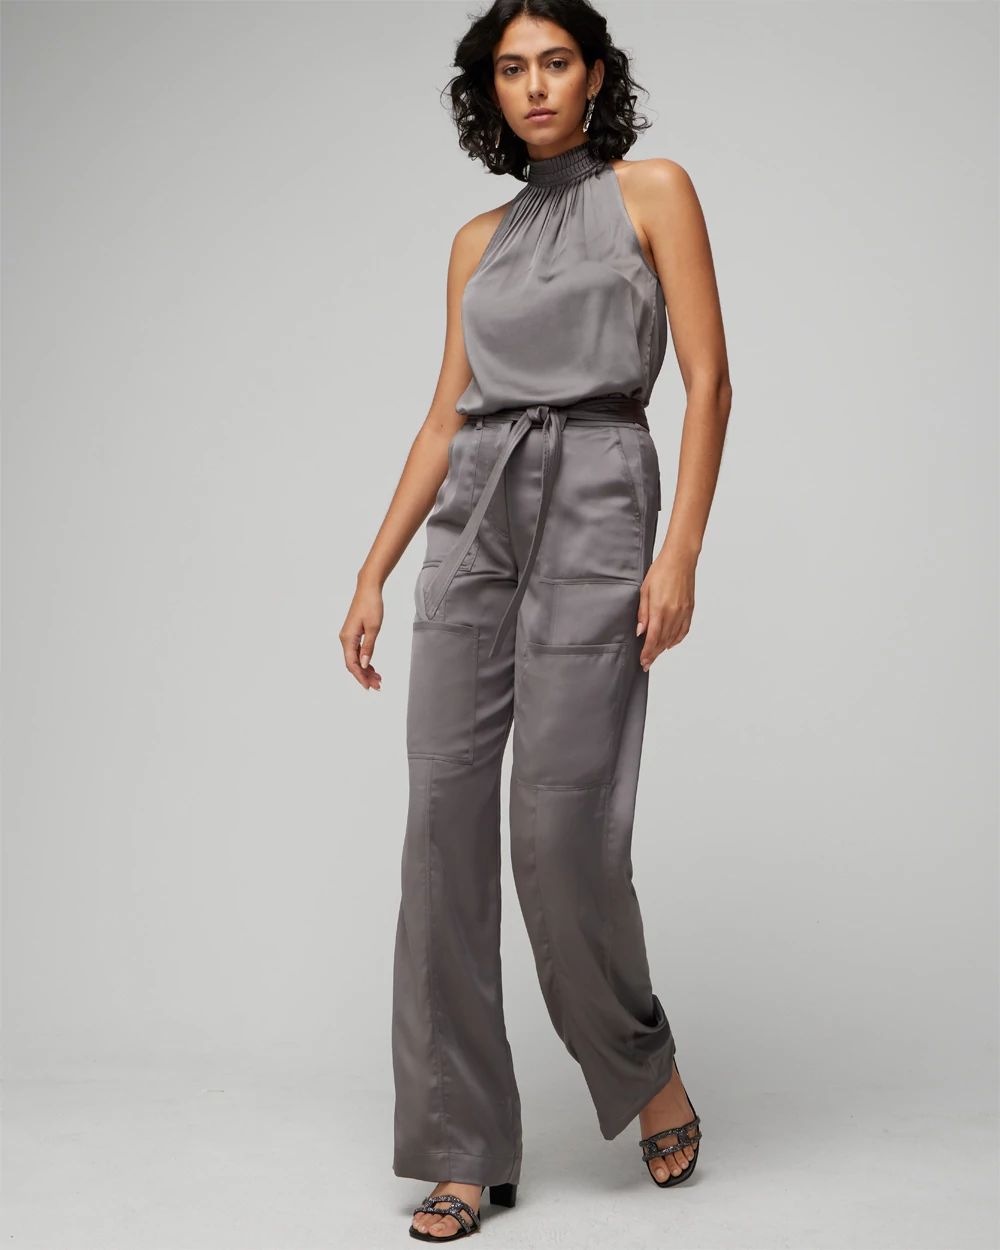 Belted Tapered Utility Trouser